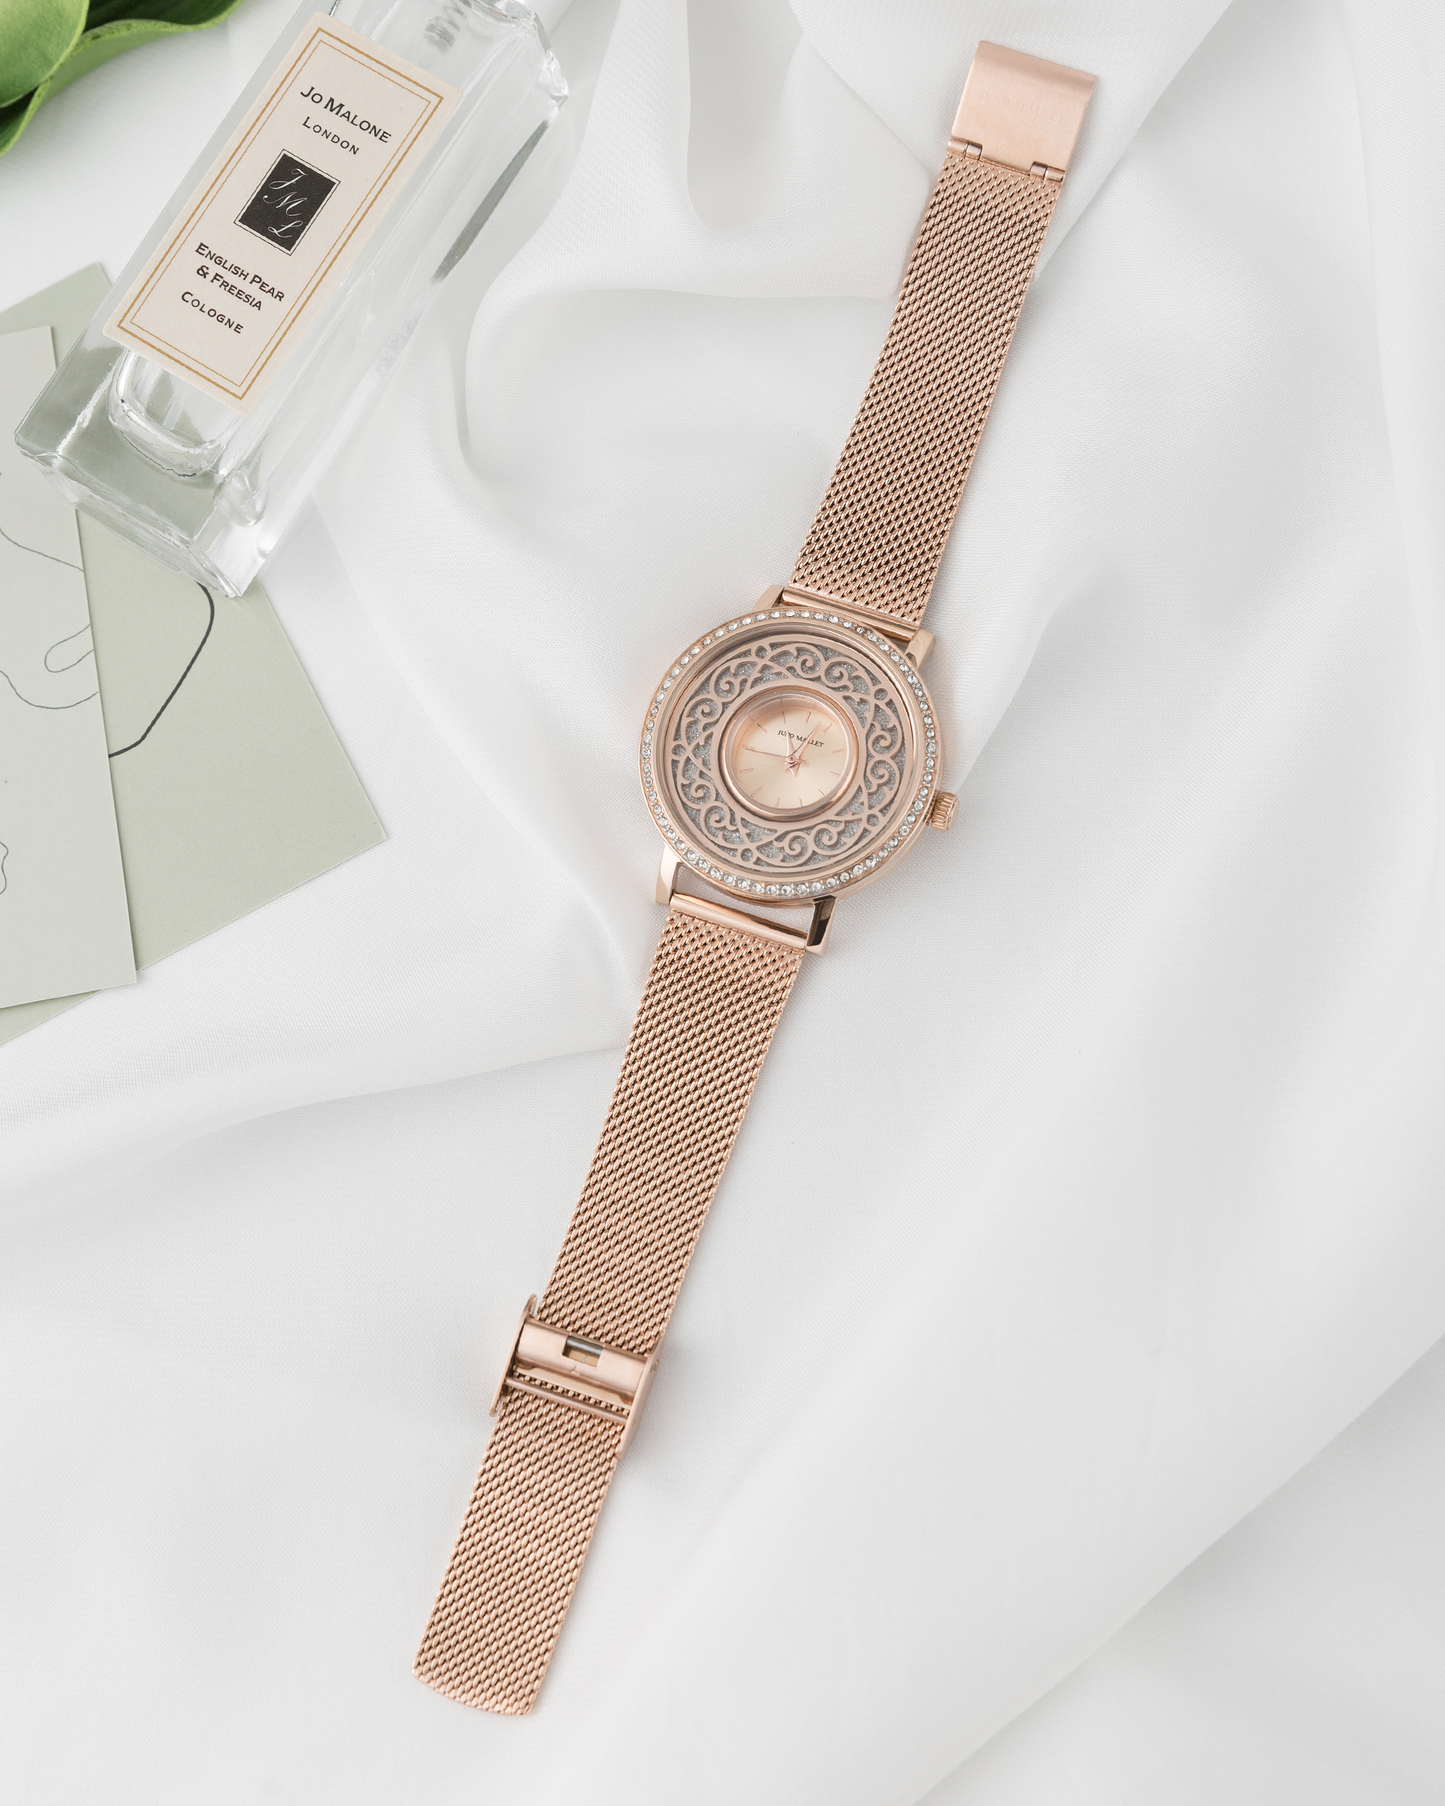 Crystal Lively Locket Watch | Rose Gold Minimalist Watch with Artistic Charm | the Silver Hand Carved Flower